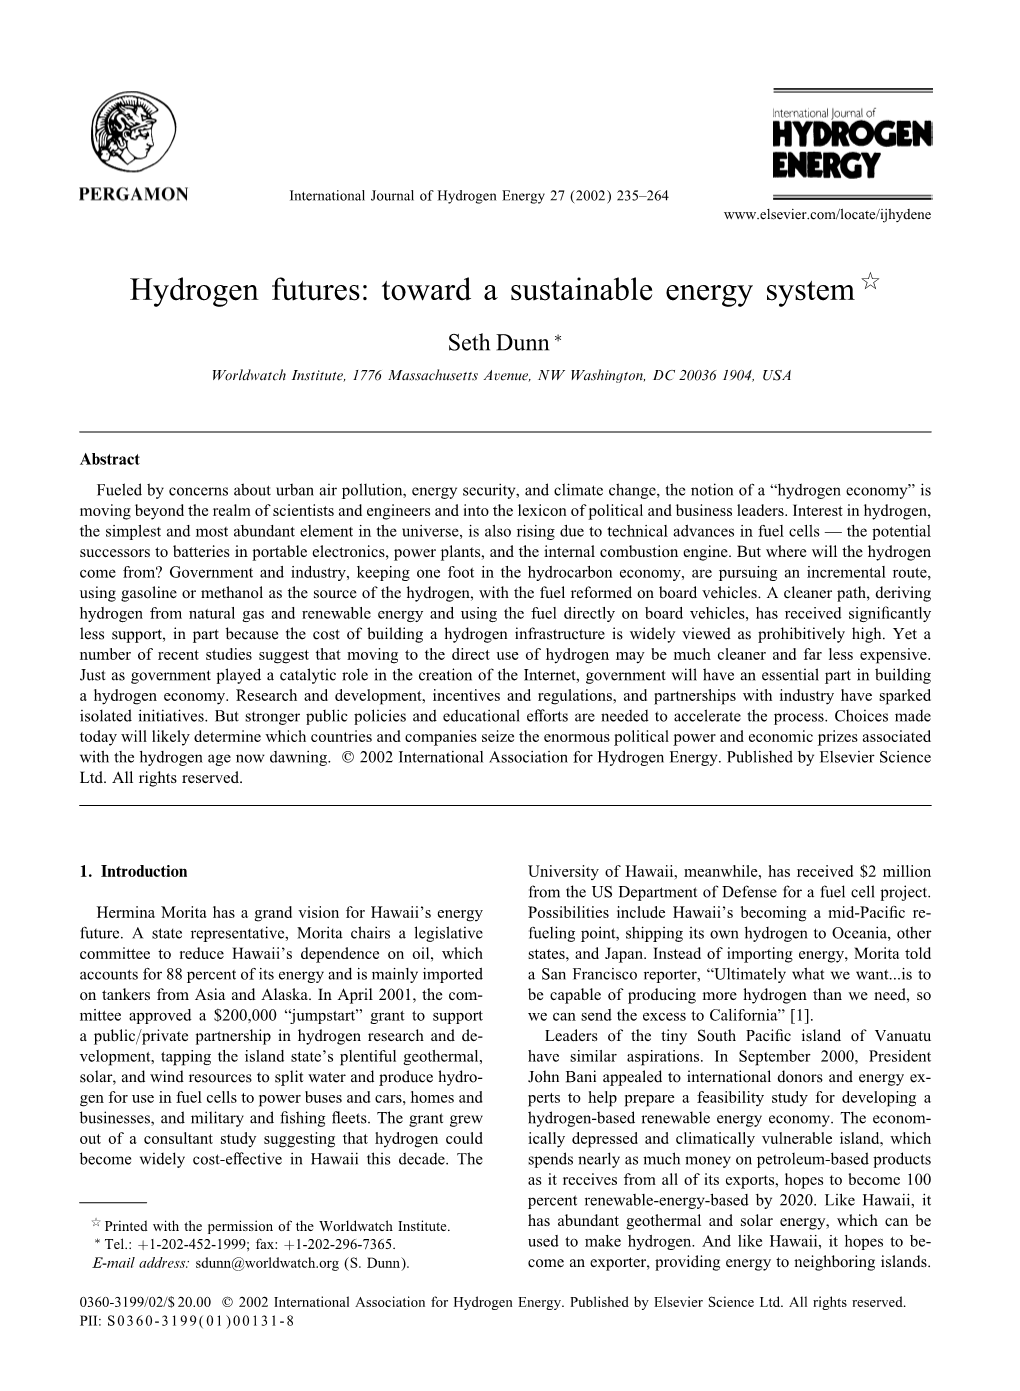 Hydrogen Futures: Toward a Sustainable Energy System 